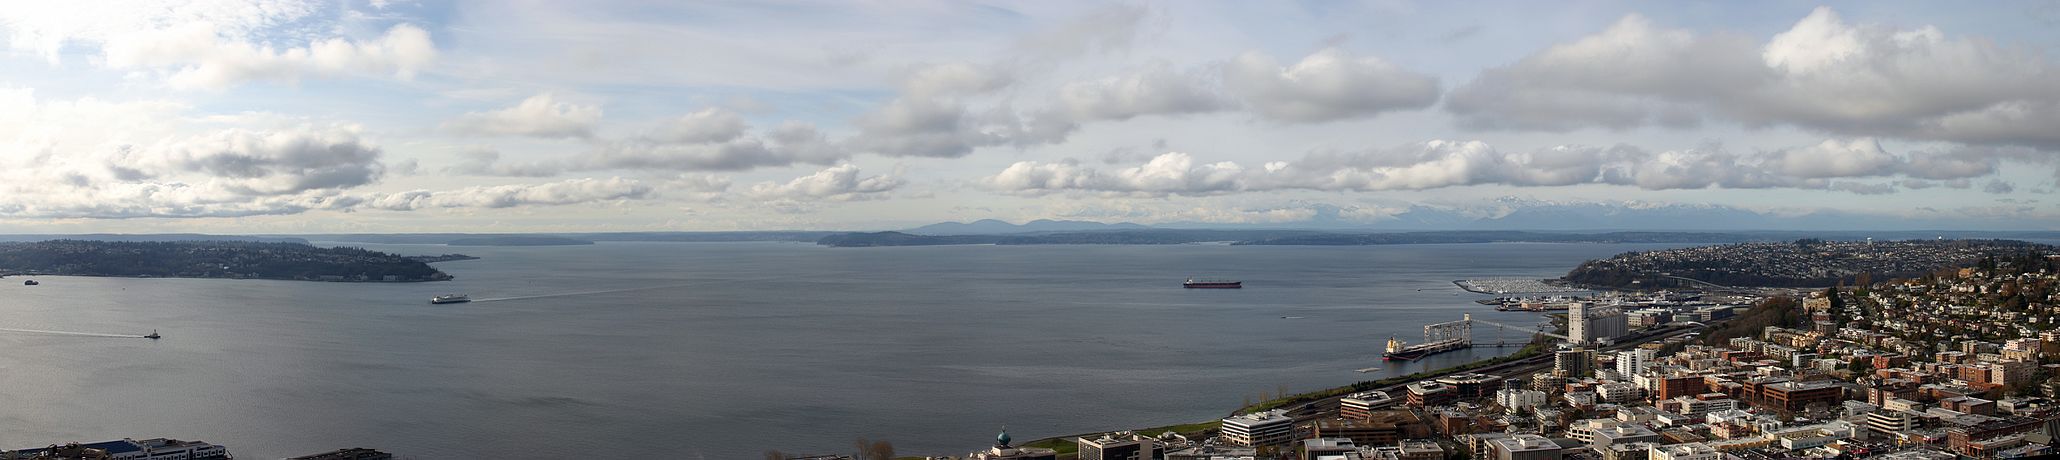 Puget Sound seen from the Space Needle